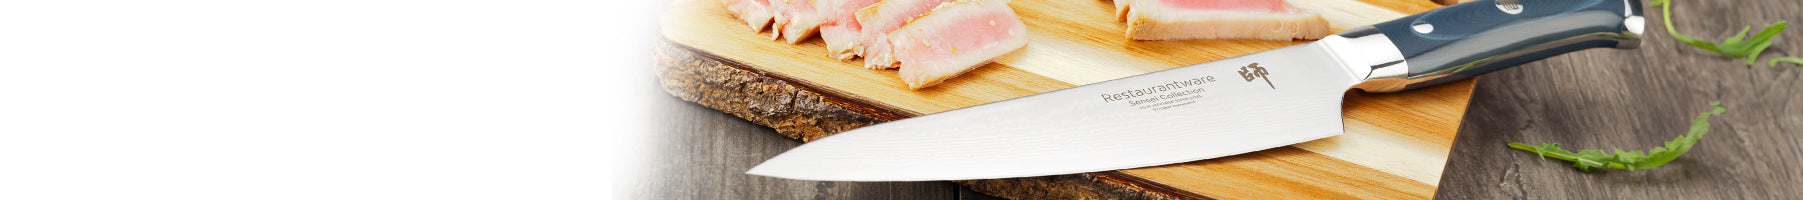 Banner_Smallwares_Kitchen-Knives-Cutlery_Chef-s-Knives_233